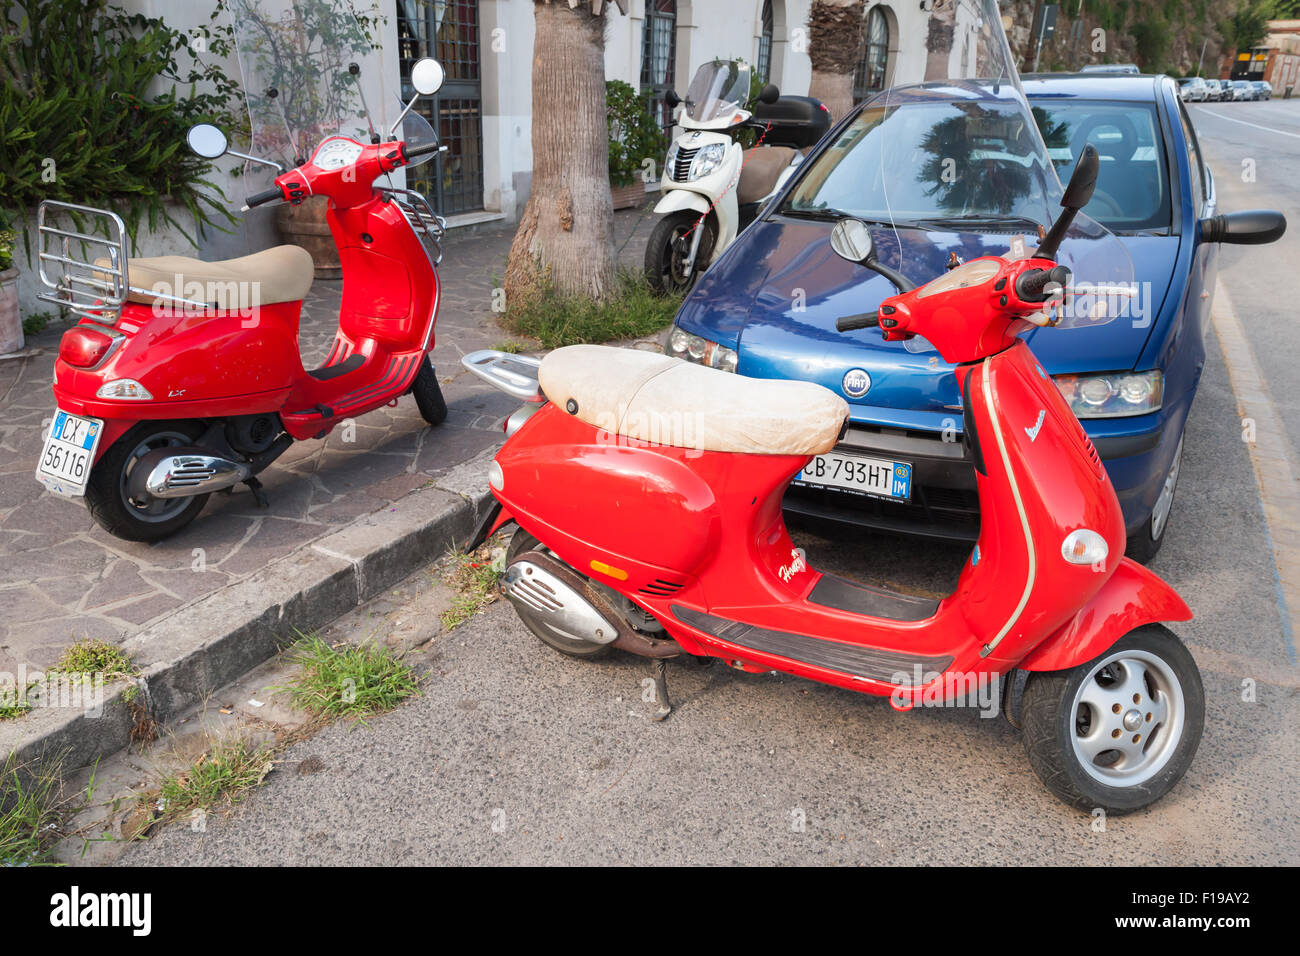 Gaeta, Italy - August 24, 2015: Classic red Vespa scooters parked on a roadside Stock Photo